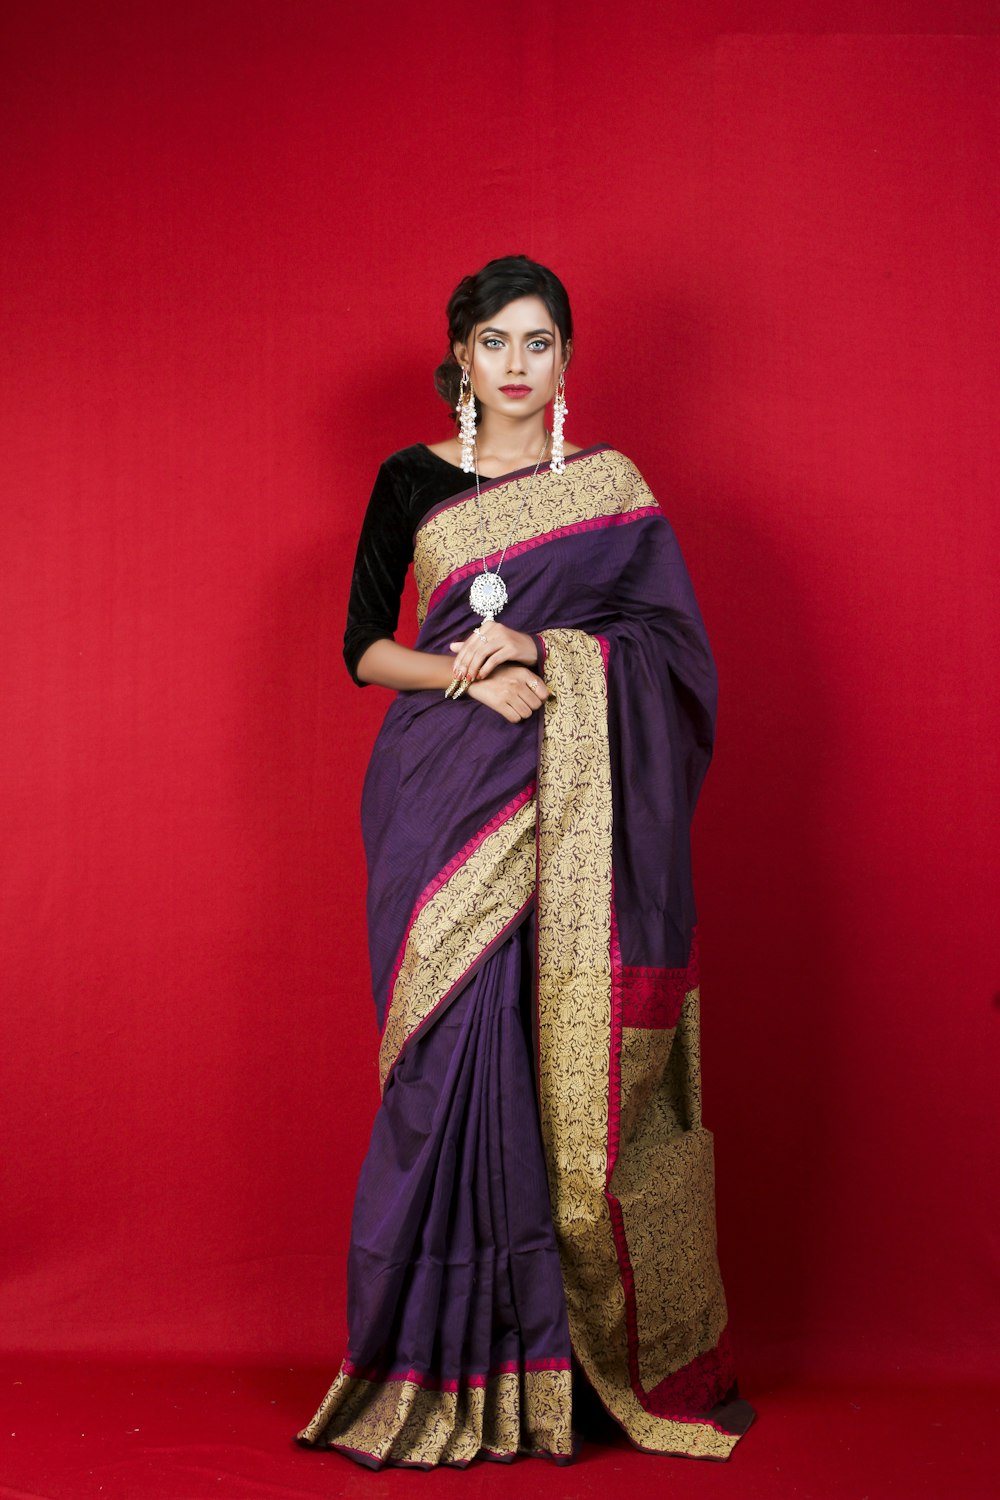 woman in red and brown sari